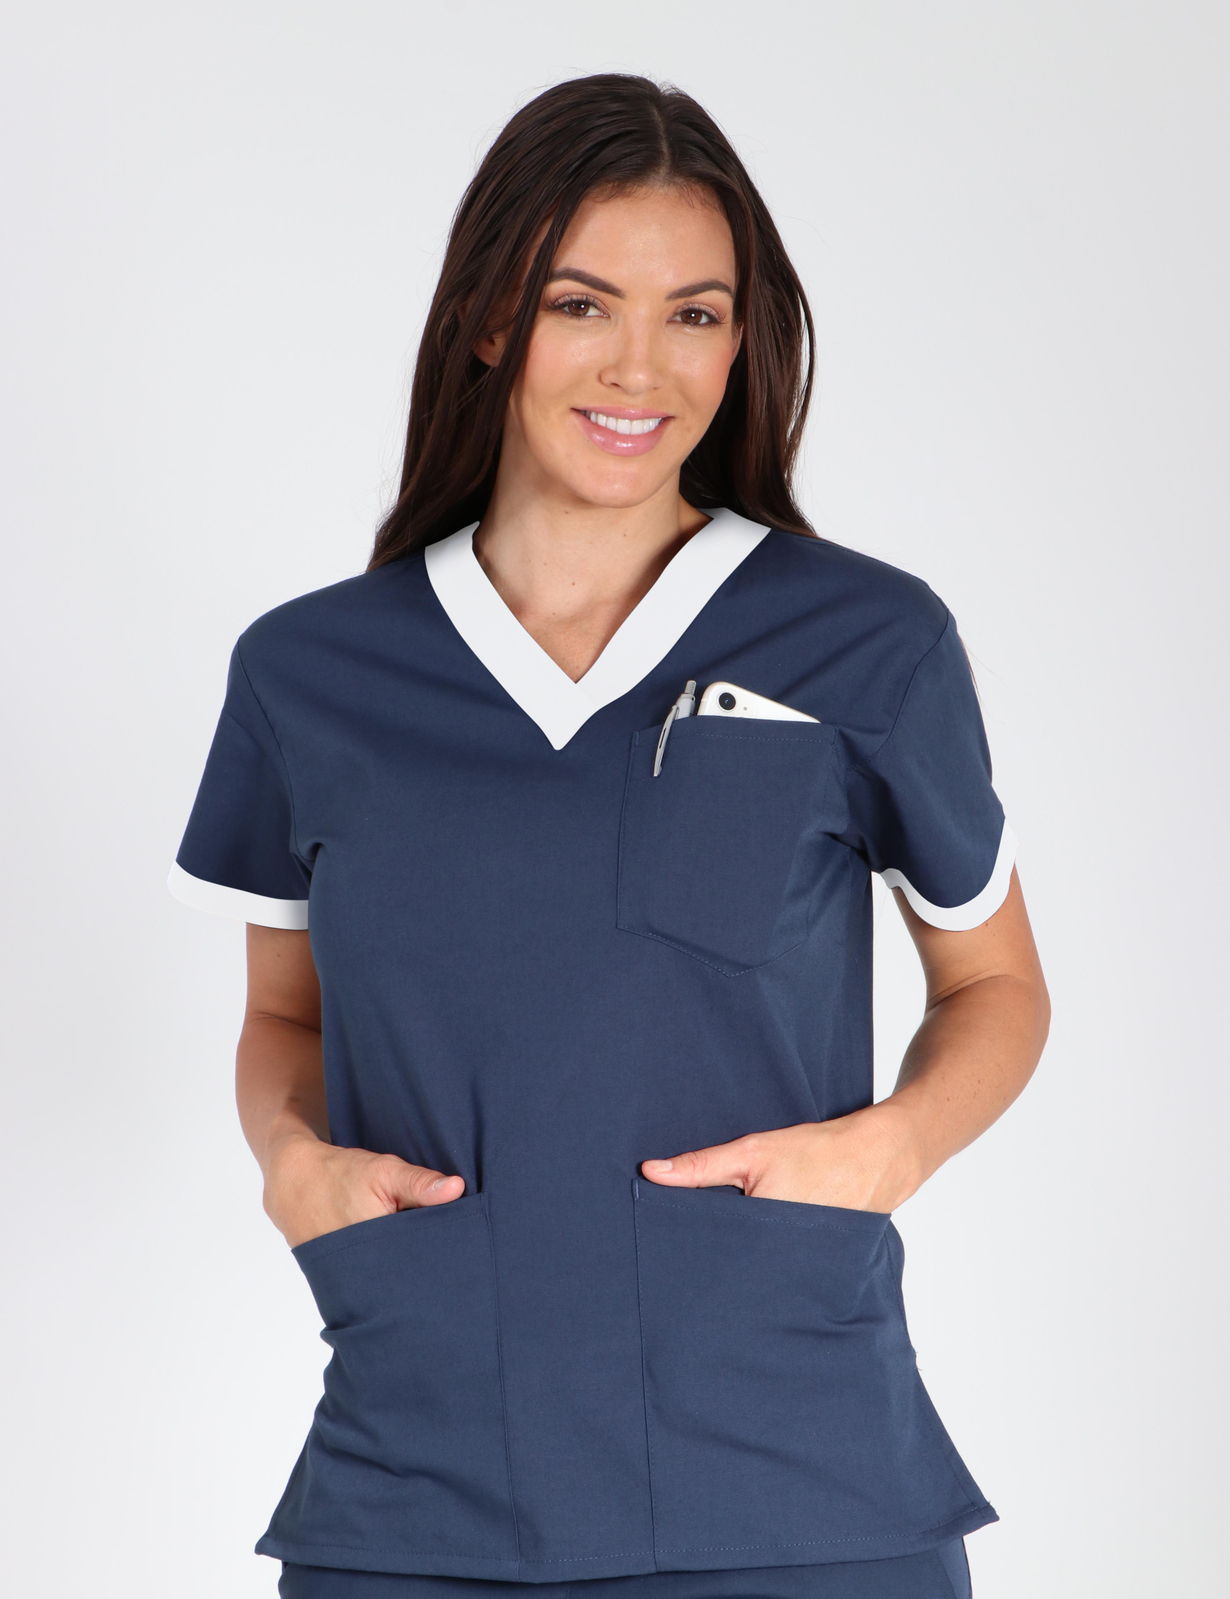 Perth Hospital - Registered Nurse (Contrast V-neck in Navy with White Trim and Cargo Pants incl Logos)